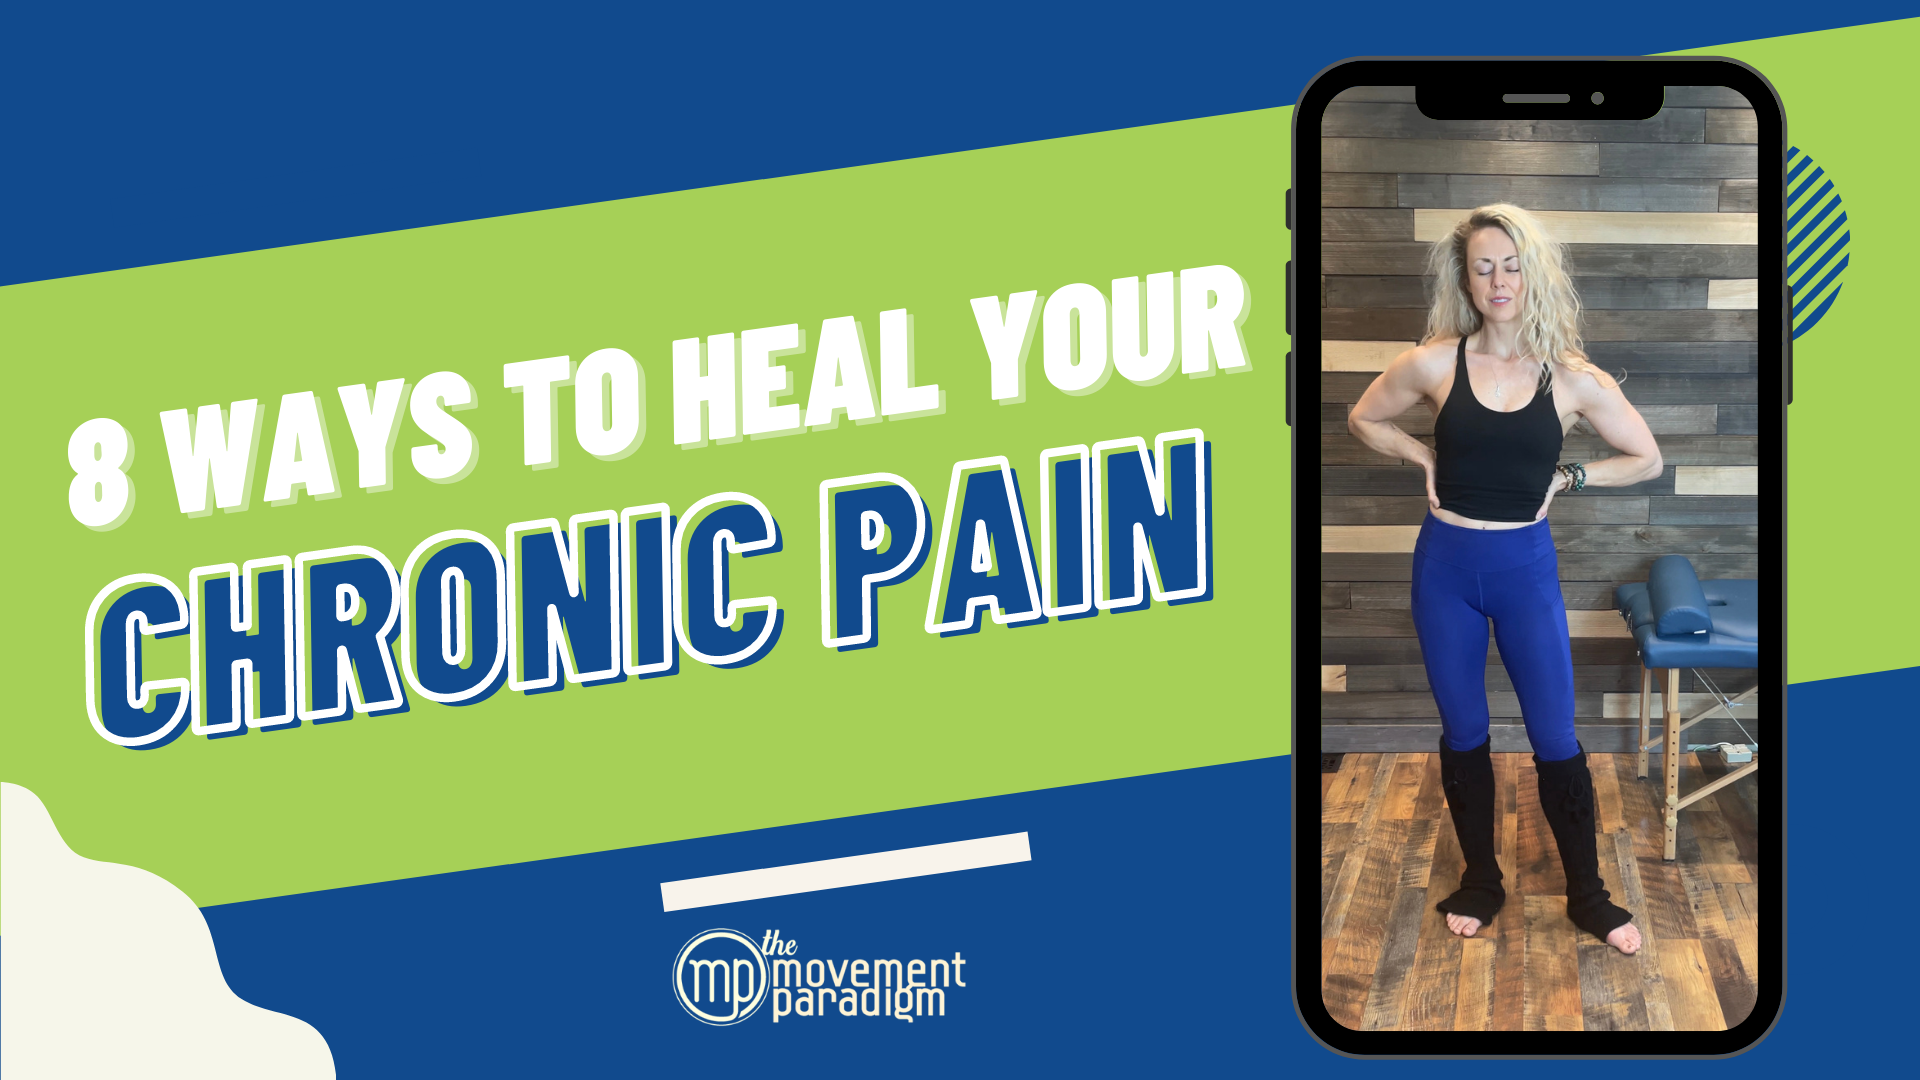 8 ways to heal your chronic pain